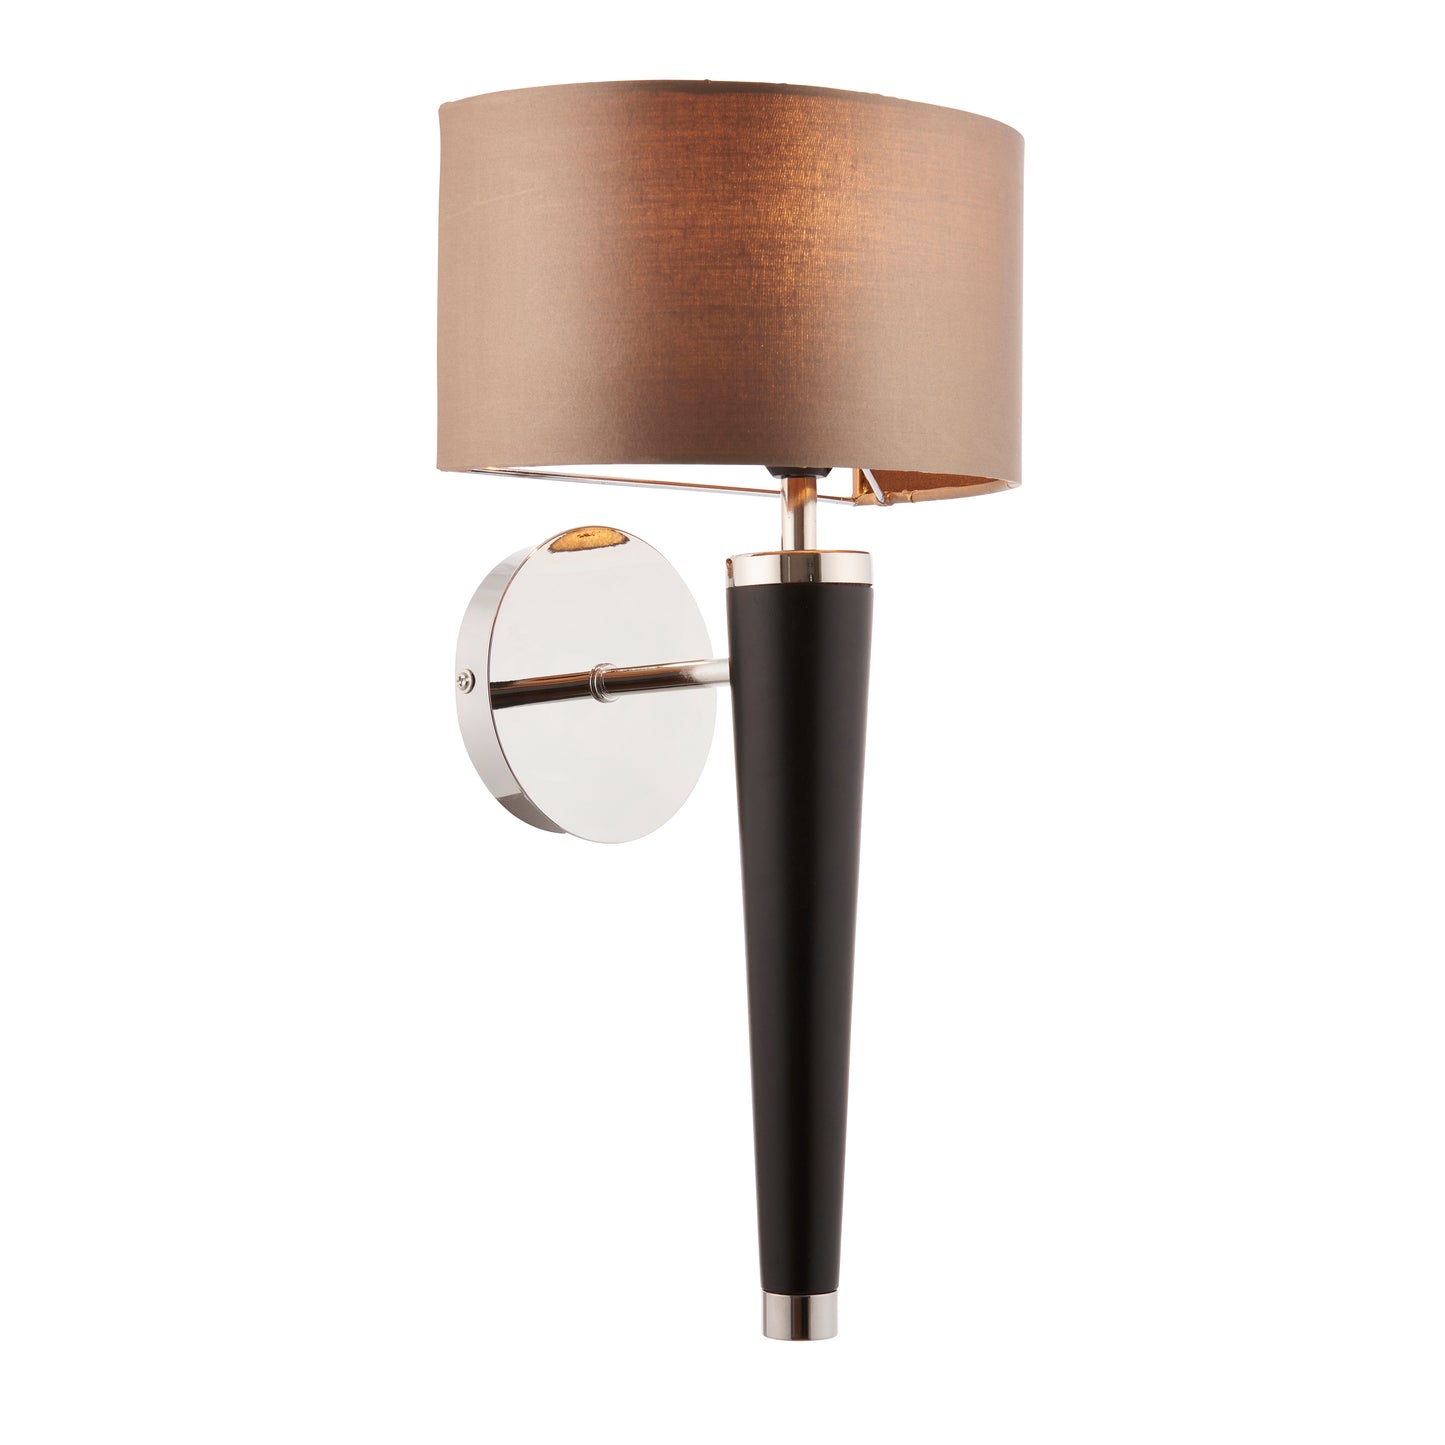 A black and brown Kingswear Wall Light with a beige shade for interior decor from Kikiathome.co.uk.